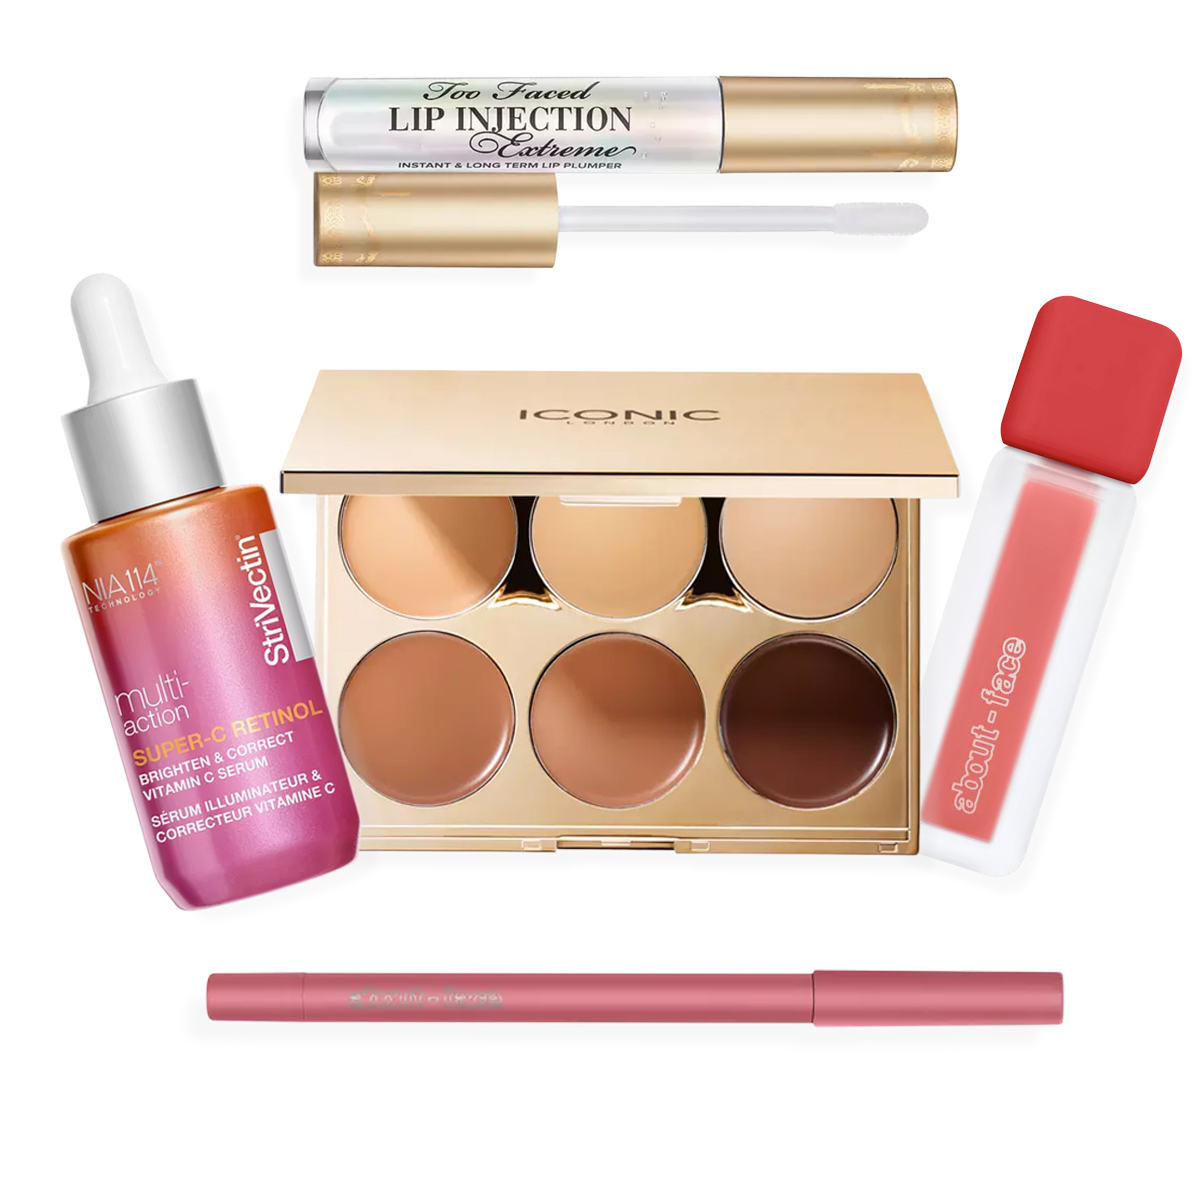 Ulta 24-Hour Flash Sale: 50% Off Halsey's About-Face, Too Faced & More